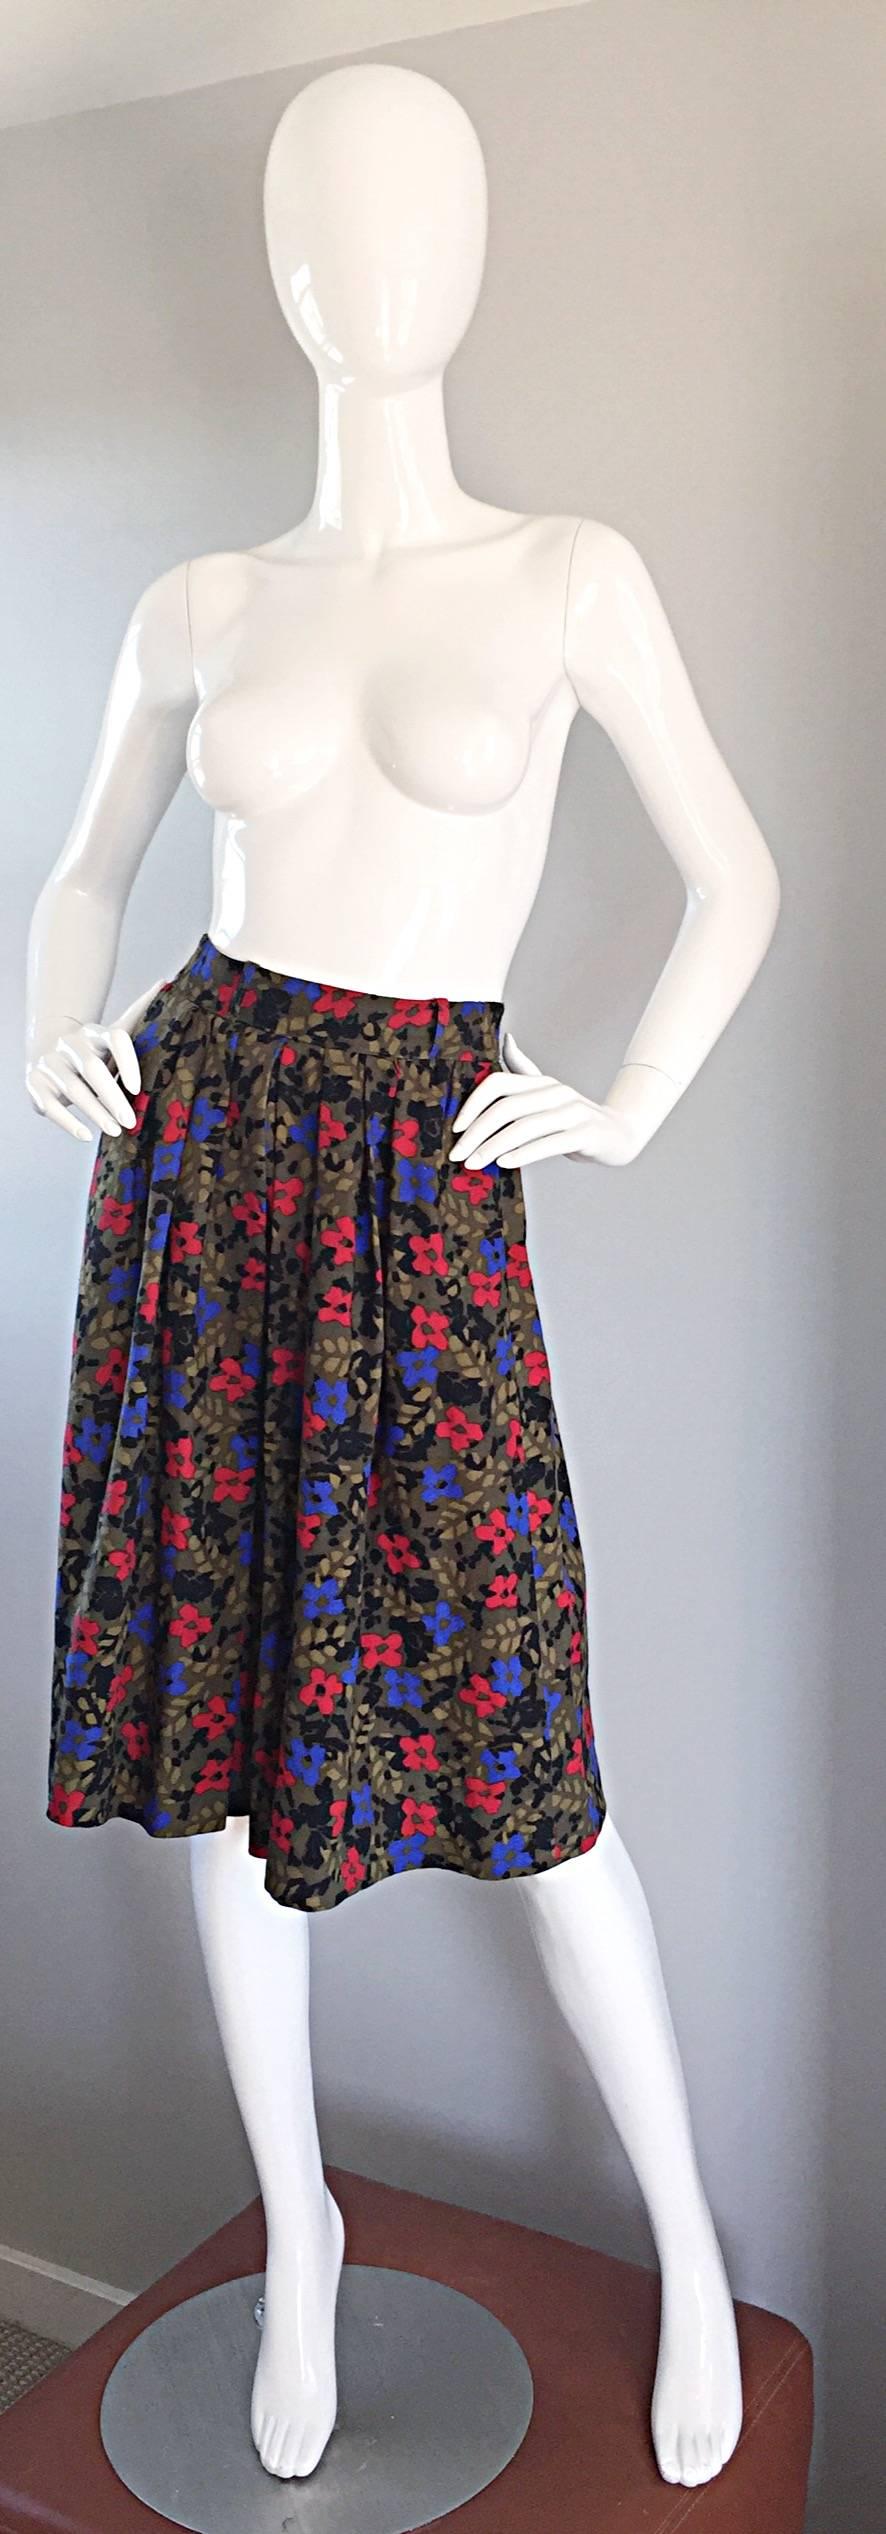 Adorable vintage Guy Laroche wool pleated skirt! Wonderful hues of olive greens, with red and blue flowers throughout. Buttons up the back. Can easily go from day to night. Perfect with a blouse, yet great with a casual tank, or turtleneck. Pairs